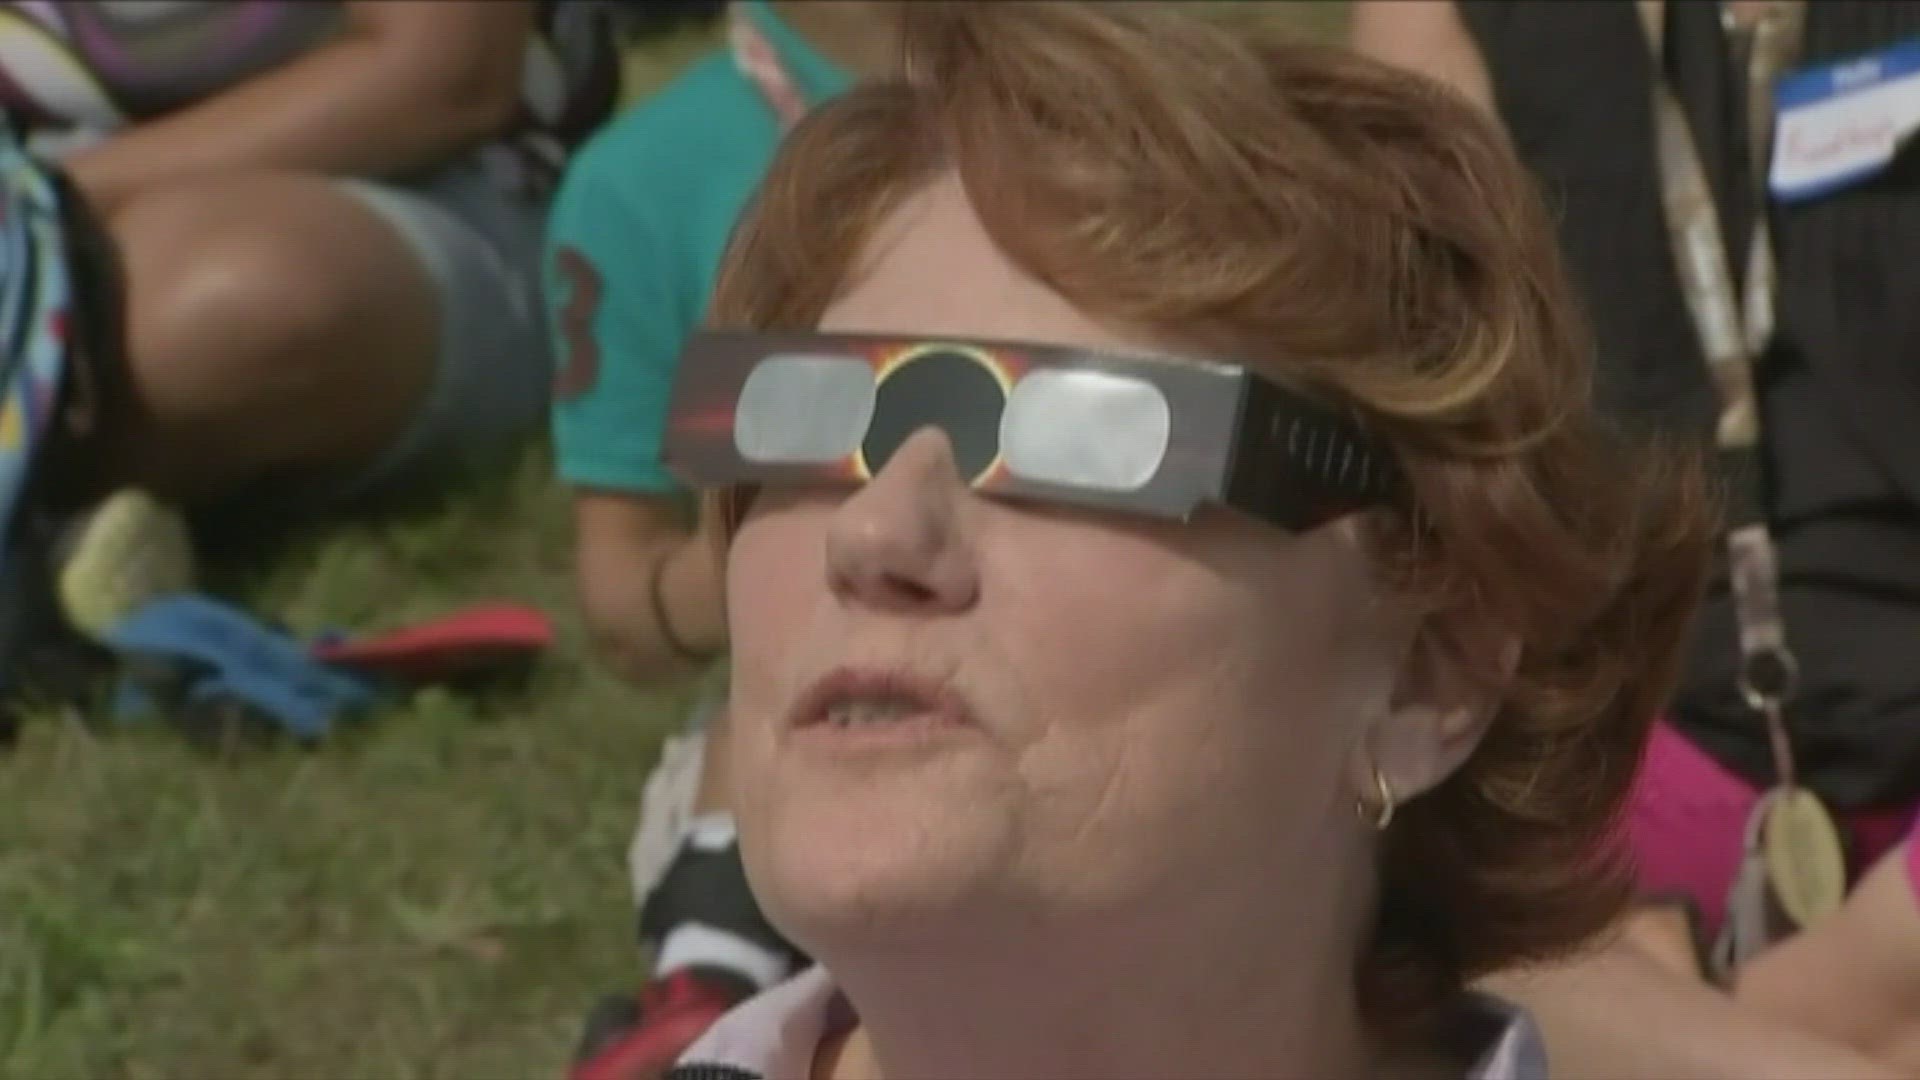 Ohio health officials want to make sure you’re taking eye safety seriously during the epic skygazing event.